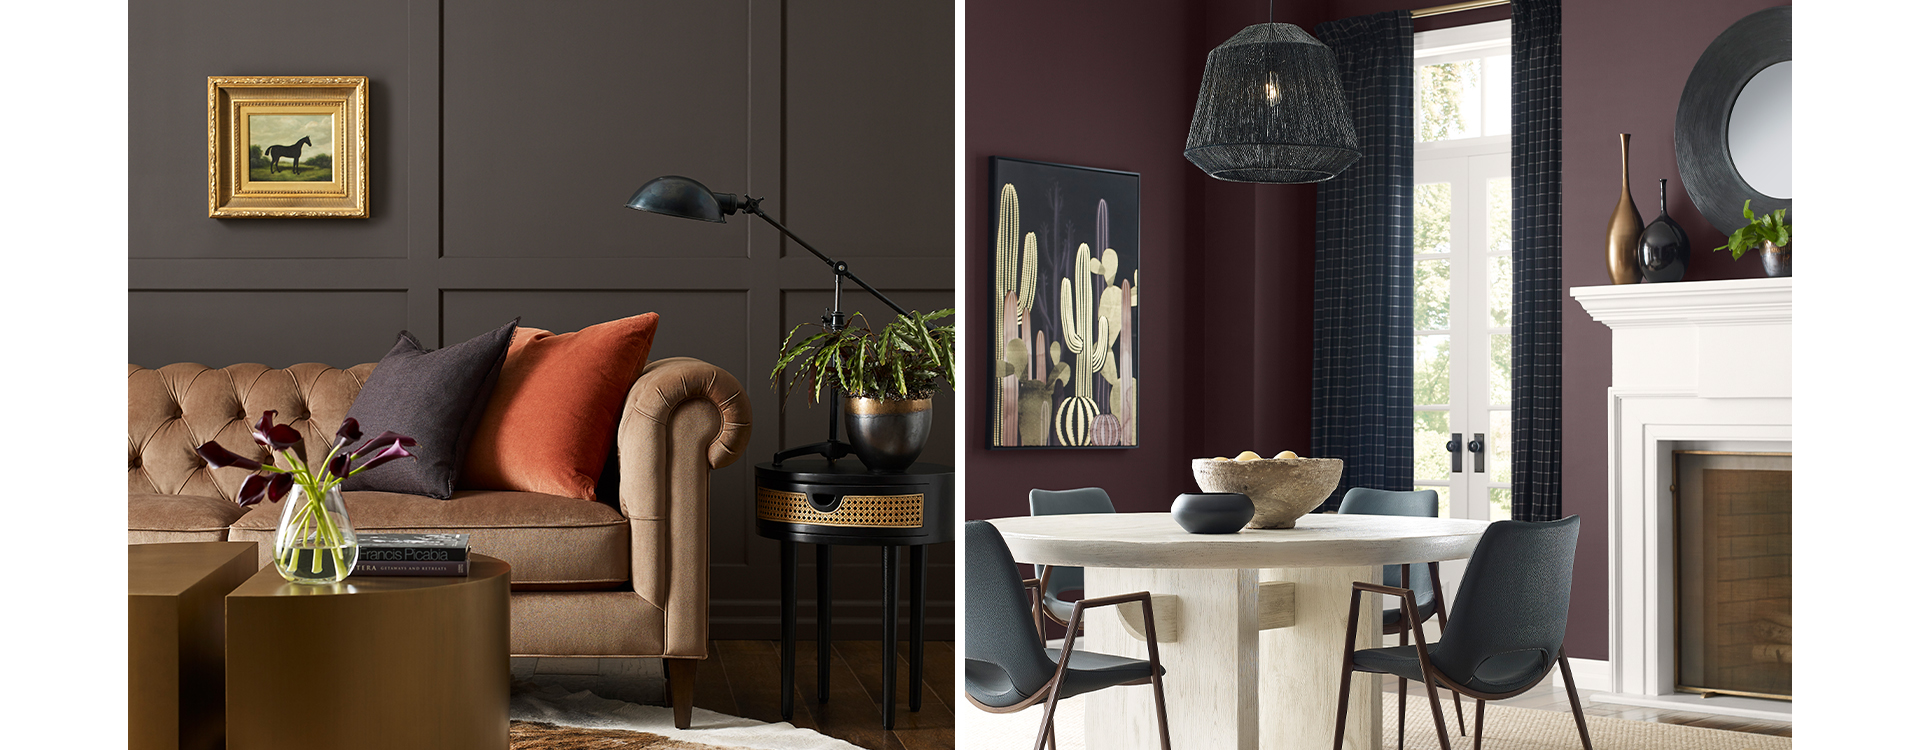 First image: Sitting room with tufted taupe velvet round-armed sofa, black side table and antique-style desk lamp, split-cylinder metallic coffee table, faux animal-hide rug and grid pattern board-and-batten wall painted deep brown. Second image: Dining area with dark purple walls with white French doors framed by navy curtains, black dining chairs and white table under black pendant light, faux zebra-hide rug in front of white fireplace.